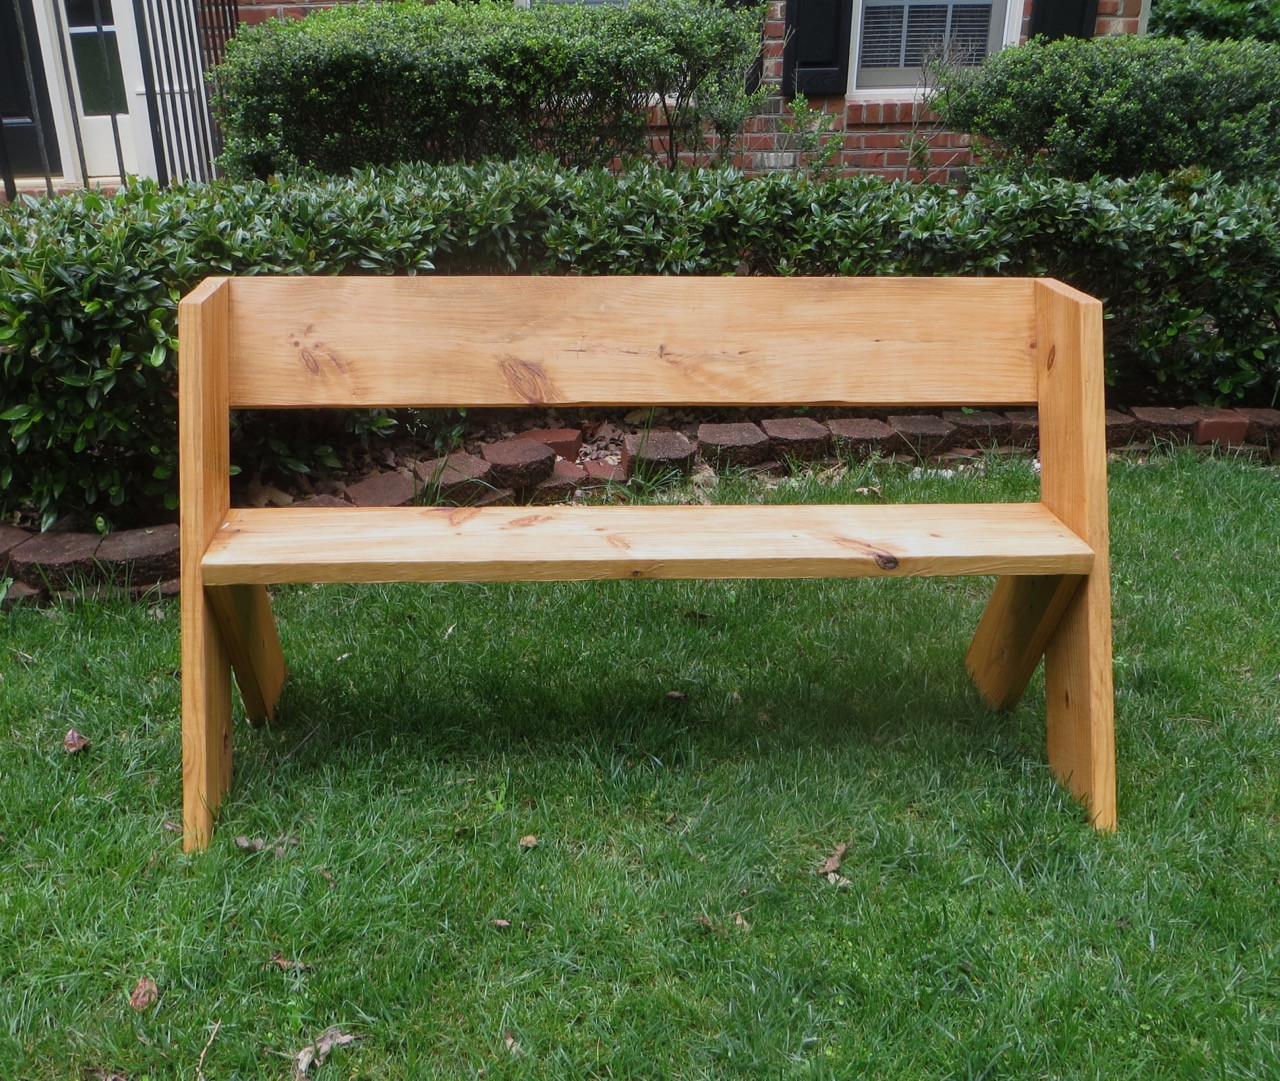 DIY Wood Bench
 The Project Lady DIY Tutorial – $16 Simple Outdoor Wood